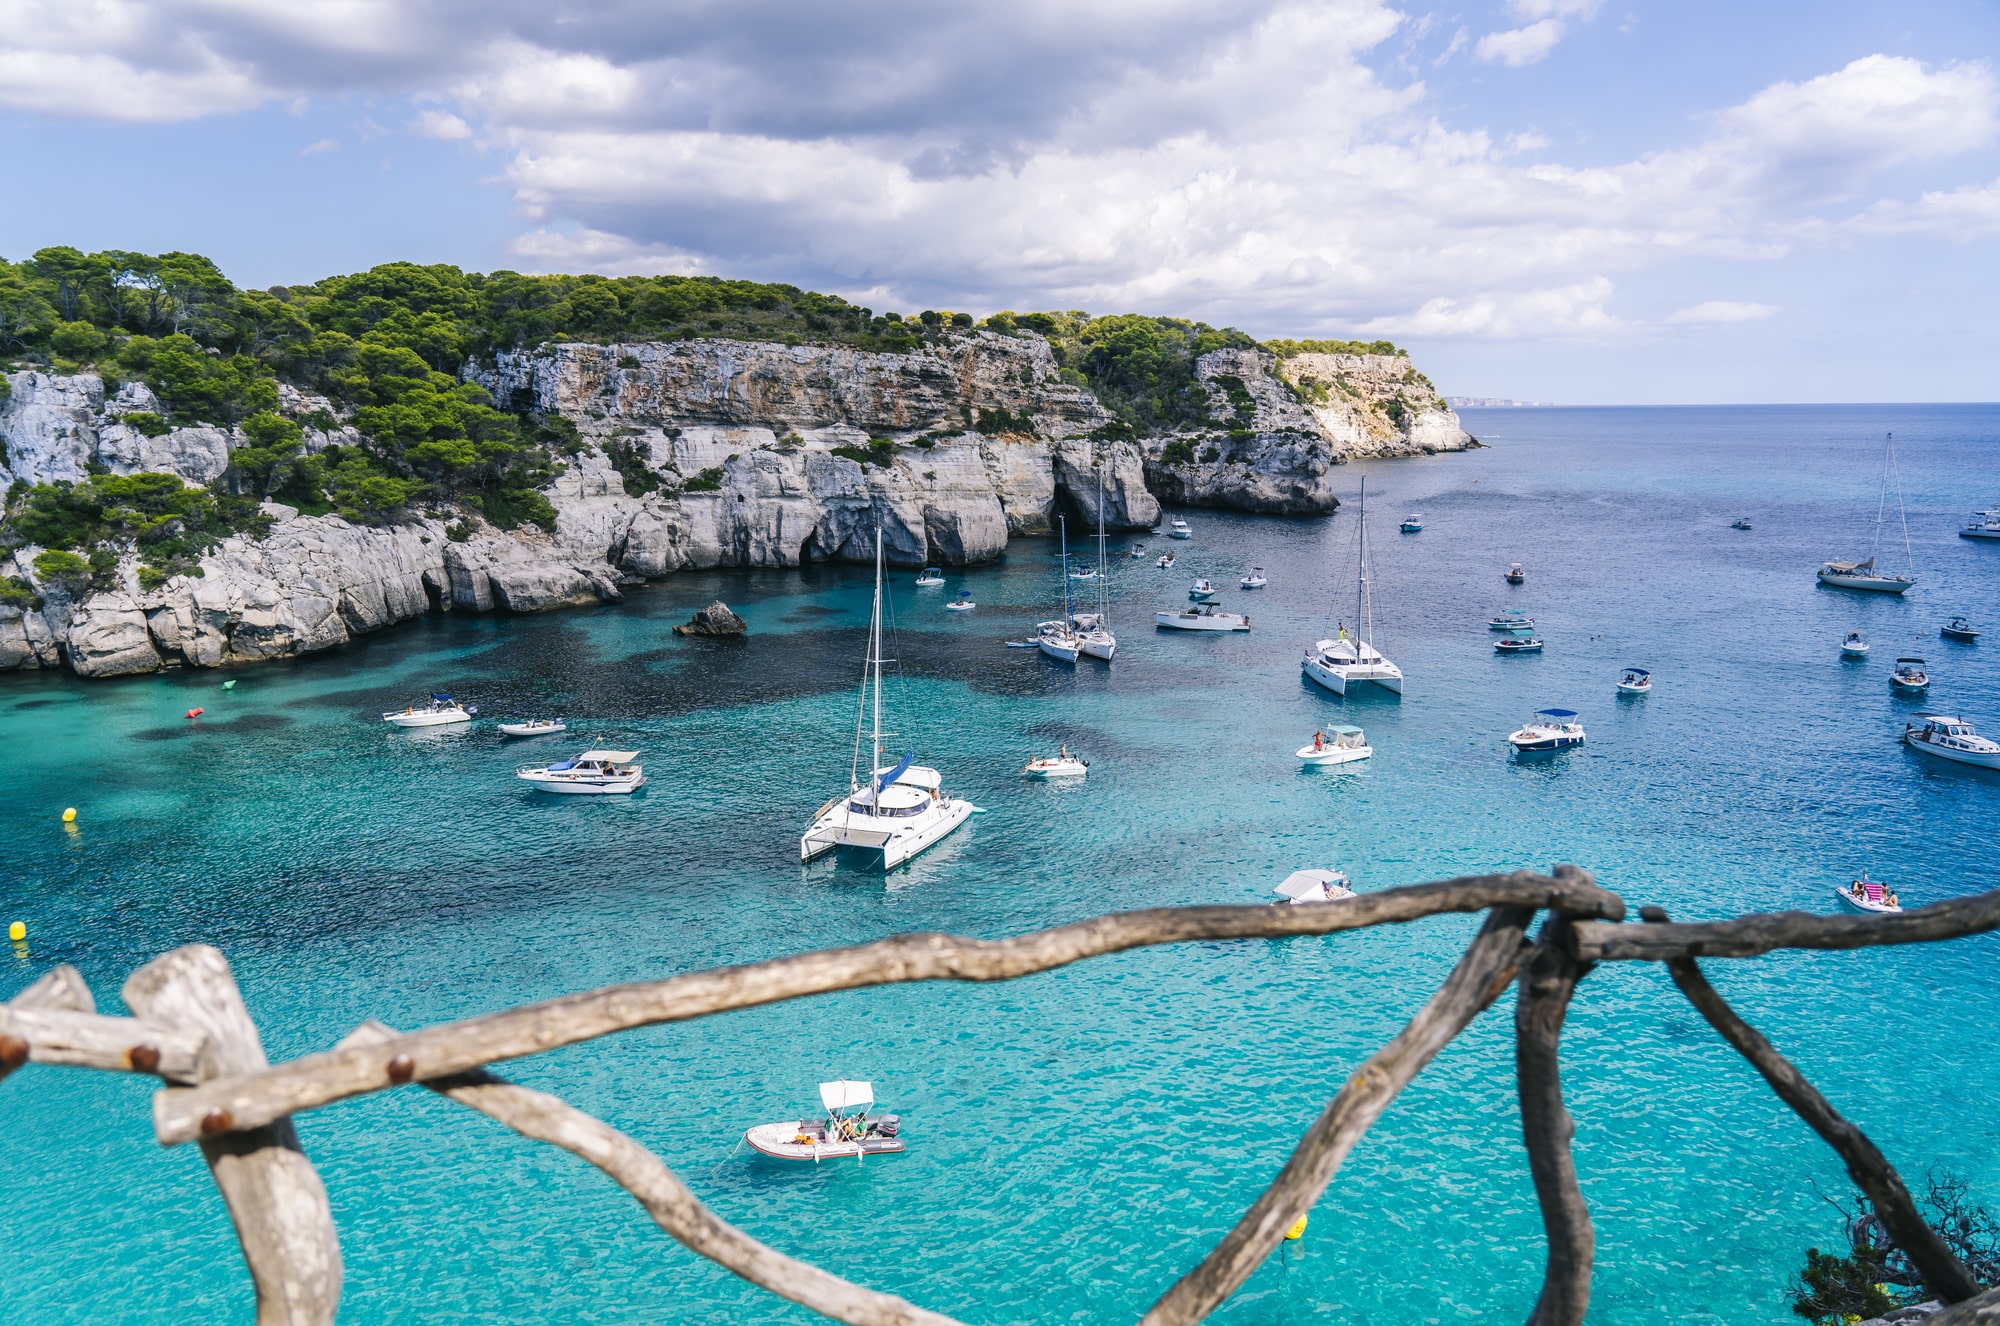 Panoramic view of Cala Macarelleta with people on their boats enjoying a day of vacation